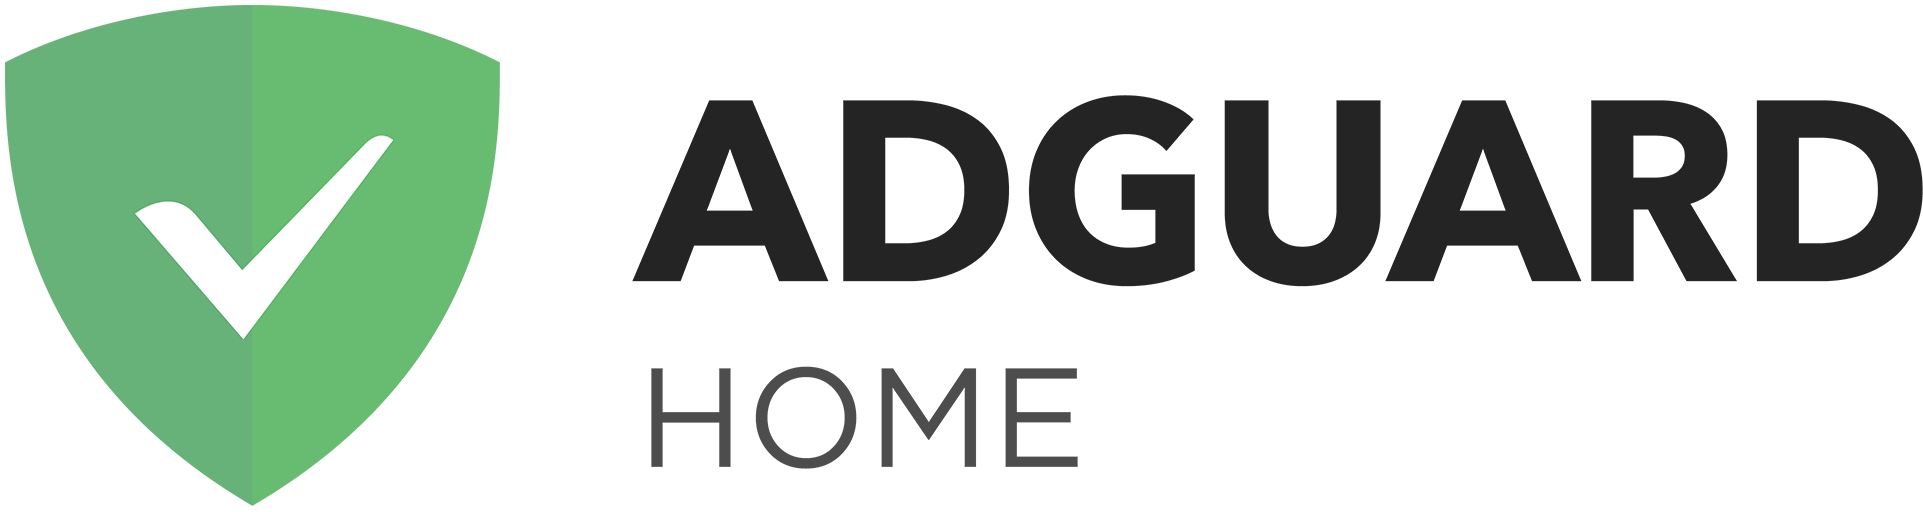 adguard home router